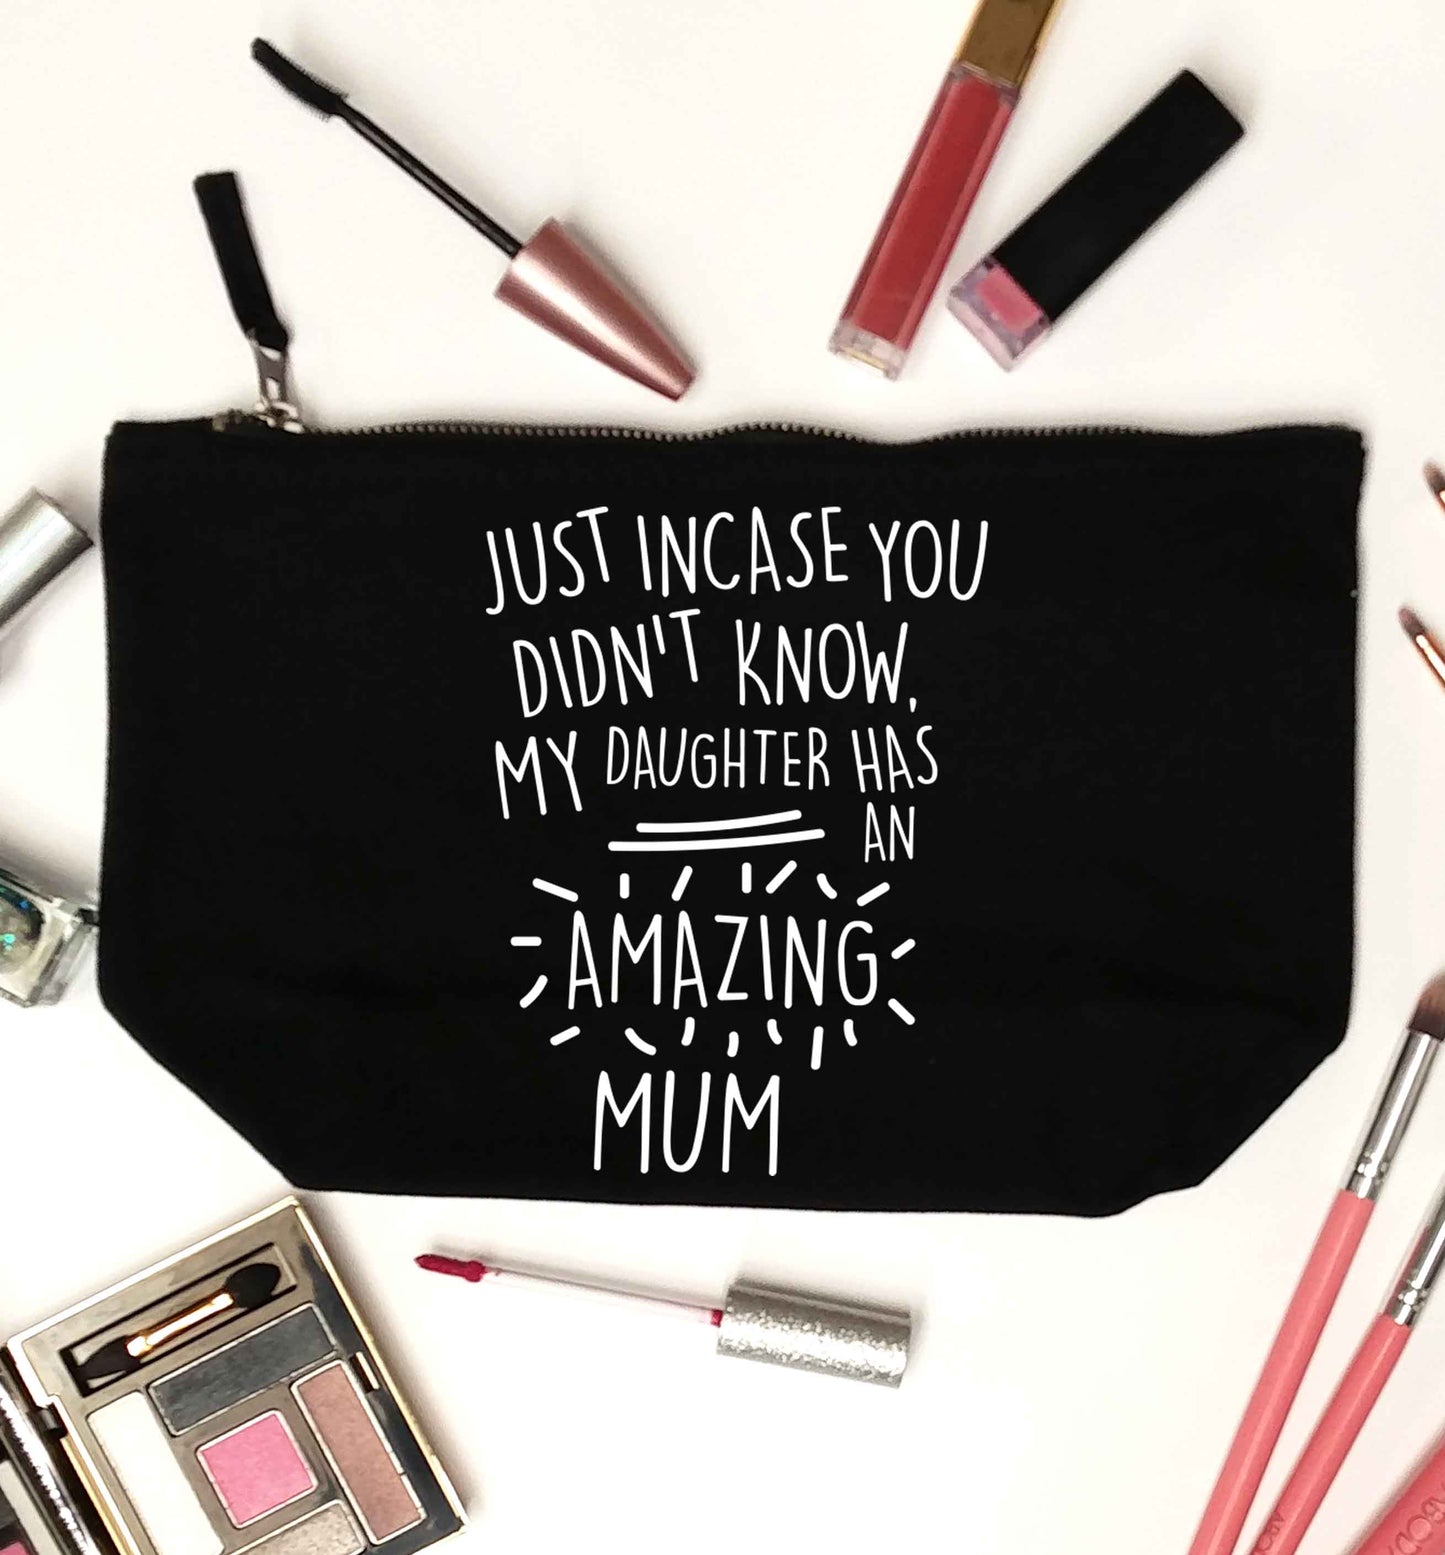 Just incase you didn't know my daughter has an amazing mum black makeup bag